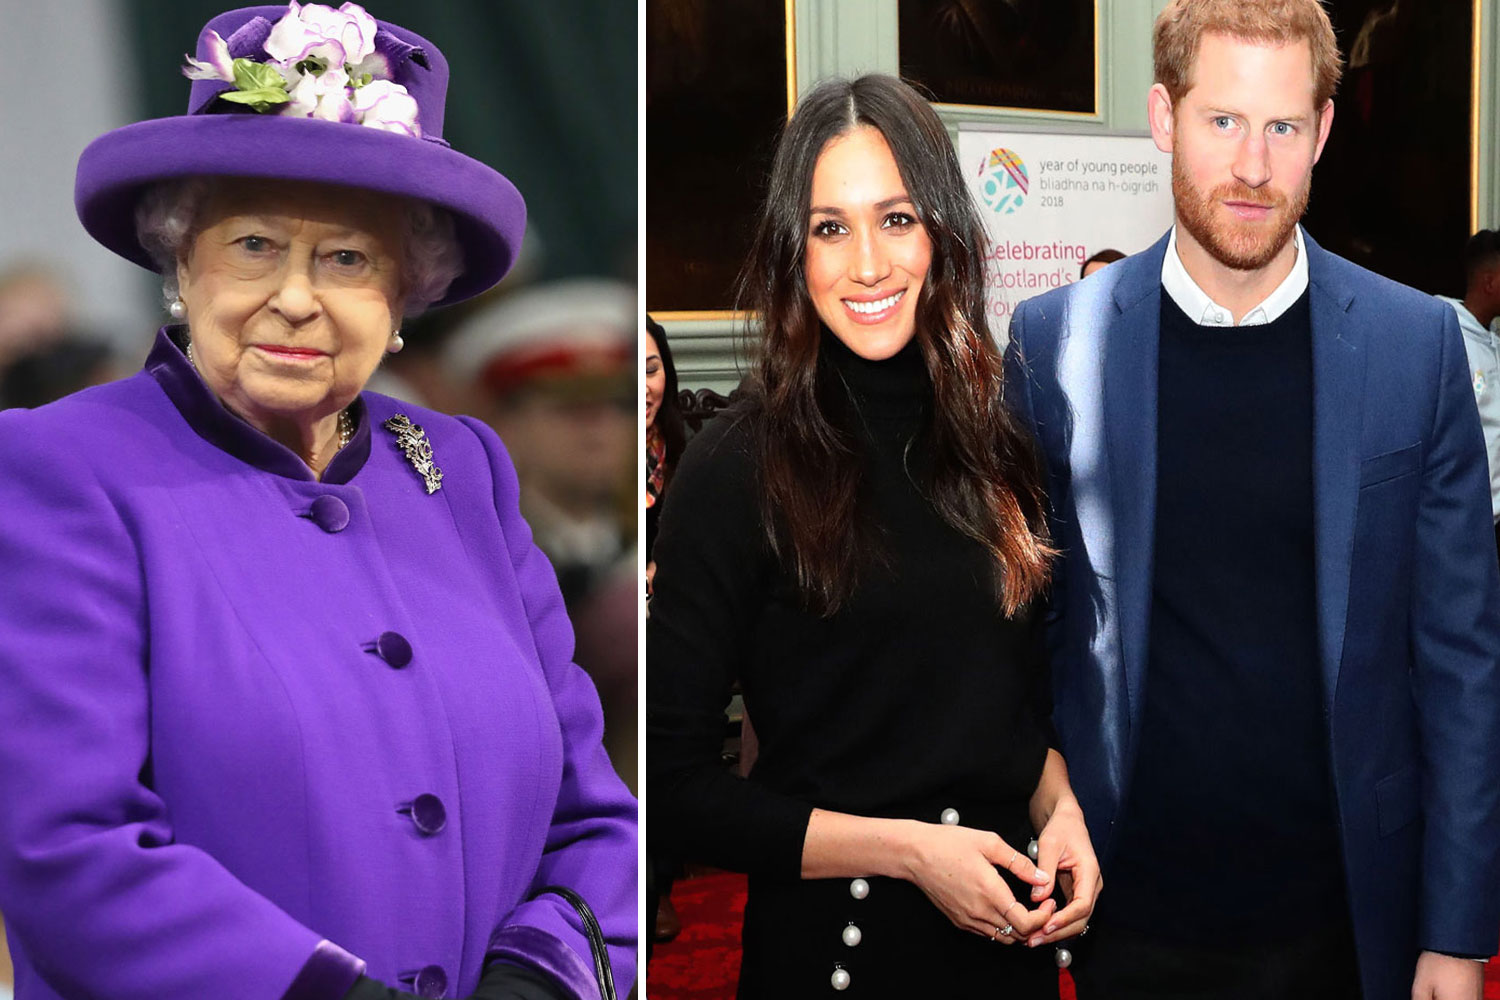 The Queen just officially gave her consent to Prince Harry and Meghan Markle